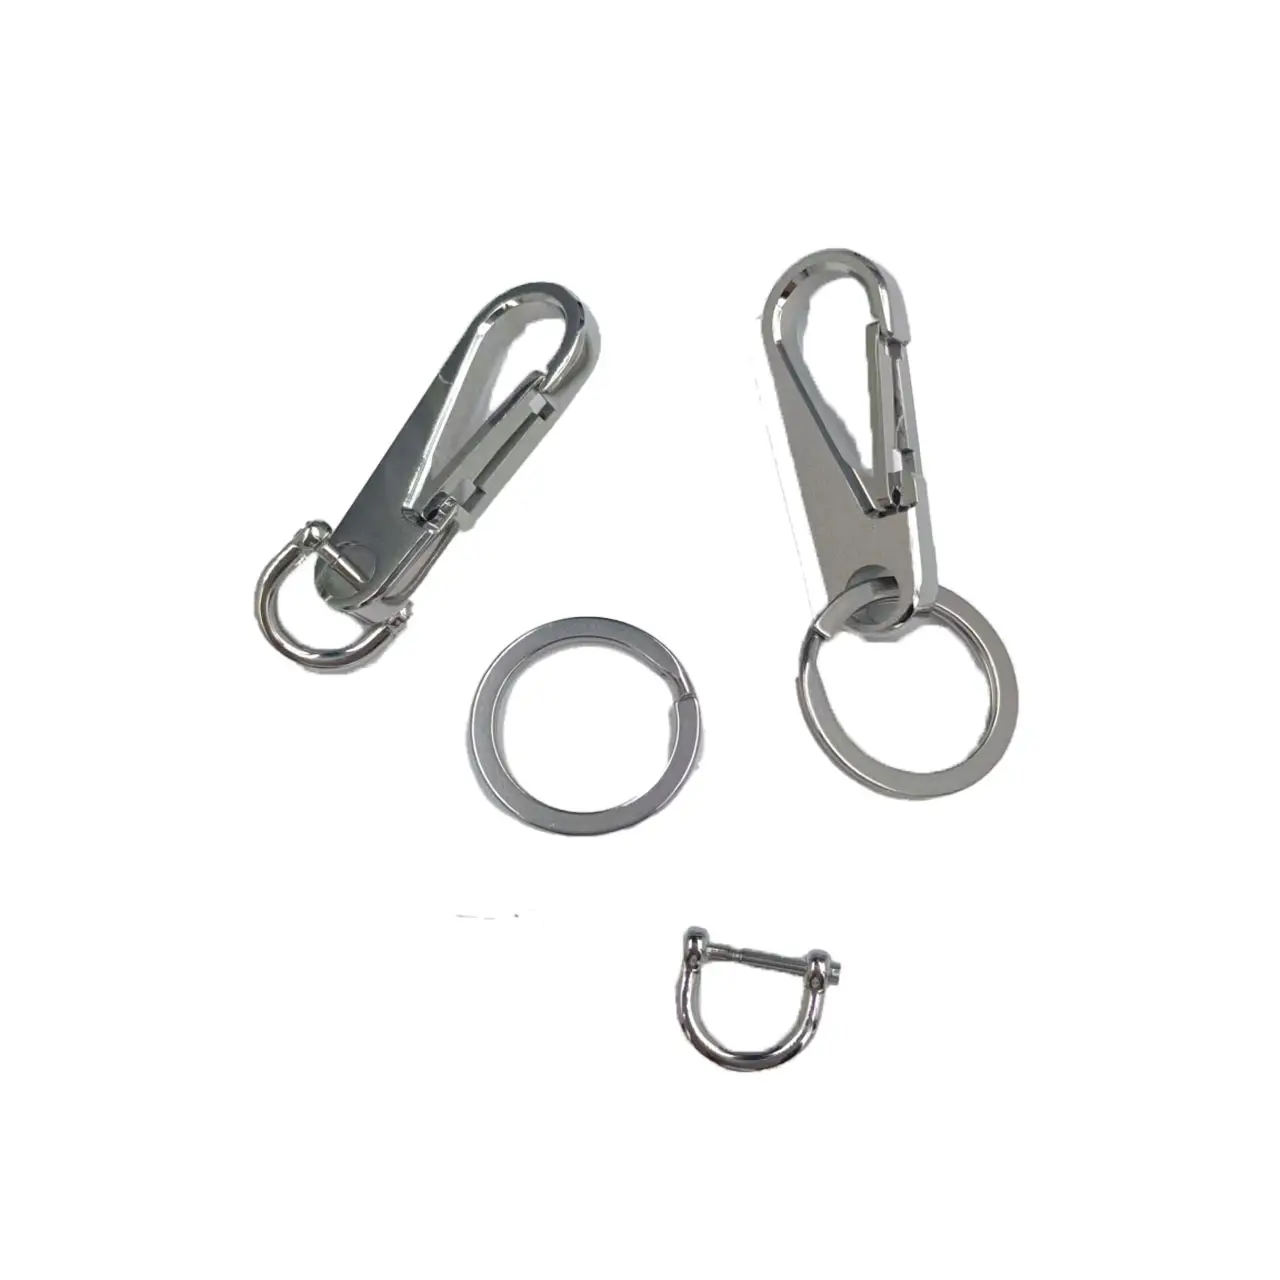 Hot sale & high quality Stainless Split Metal Steel Swivel Clasp Clips Hook Key chain